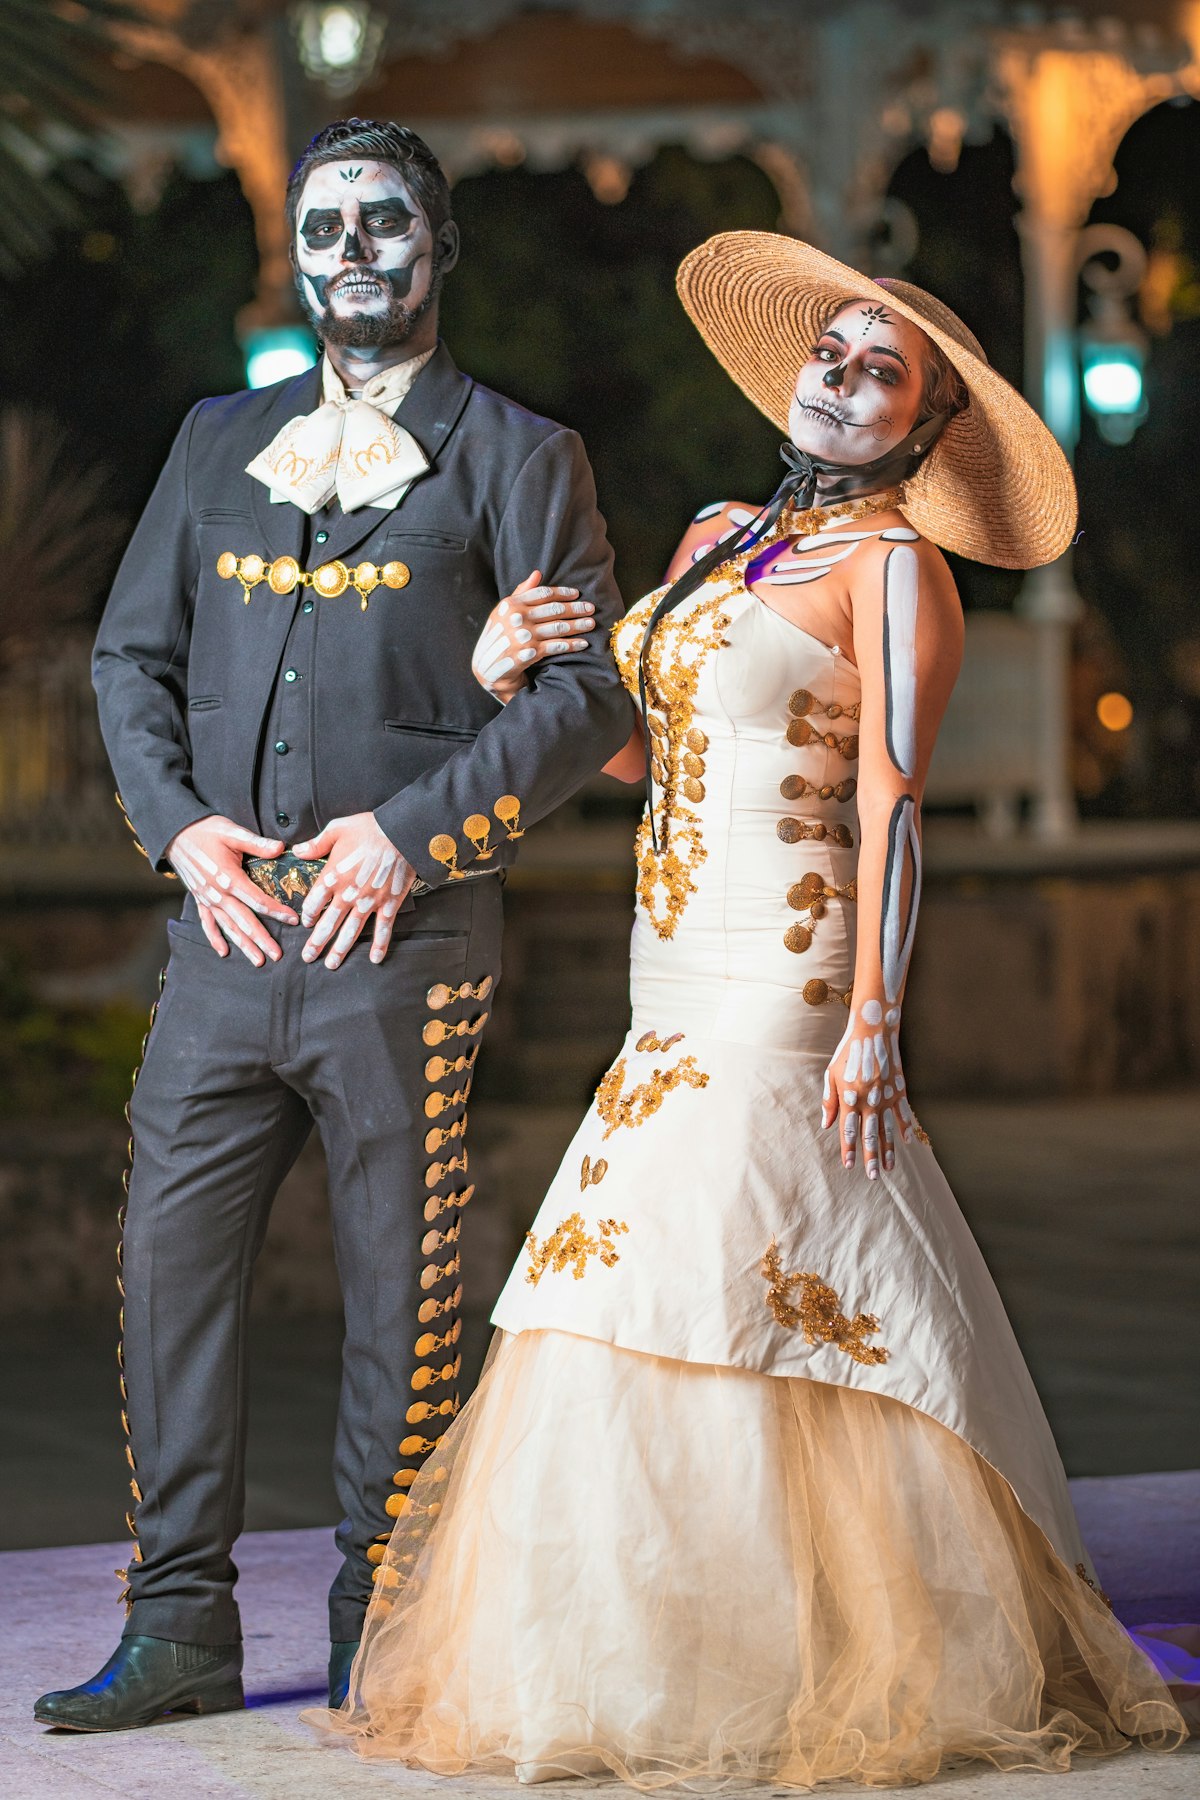 Typical or regional costumes from Mexico